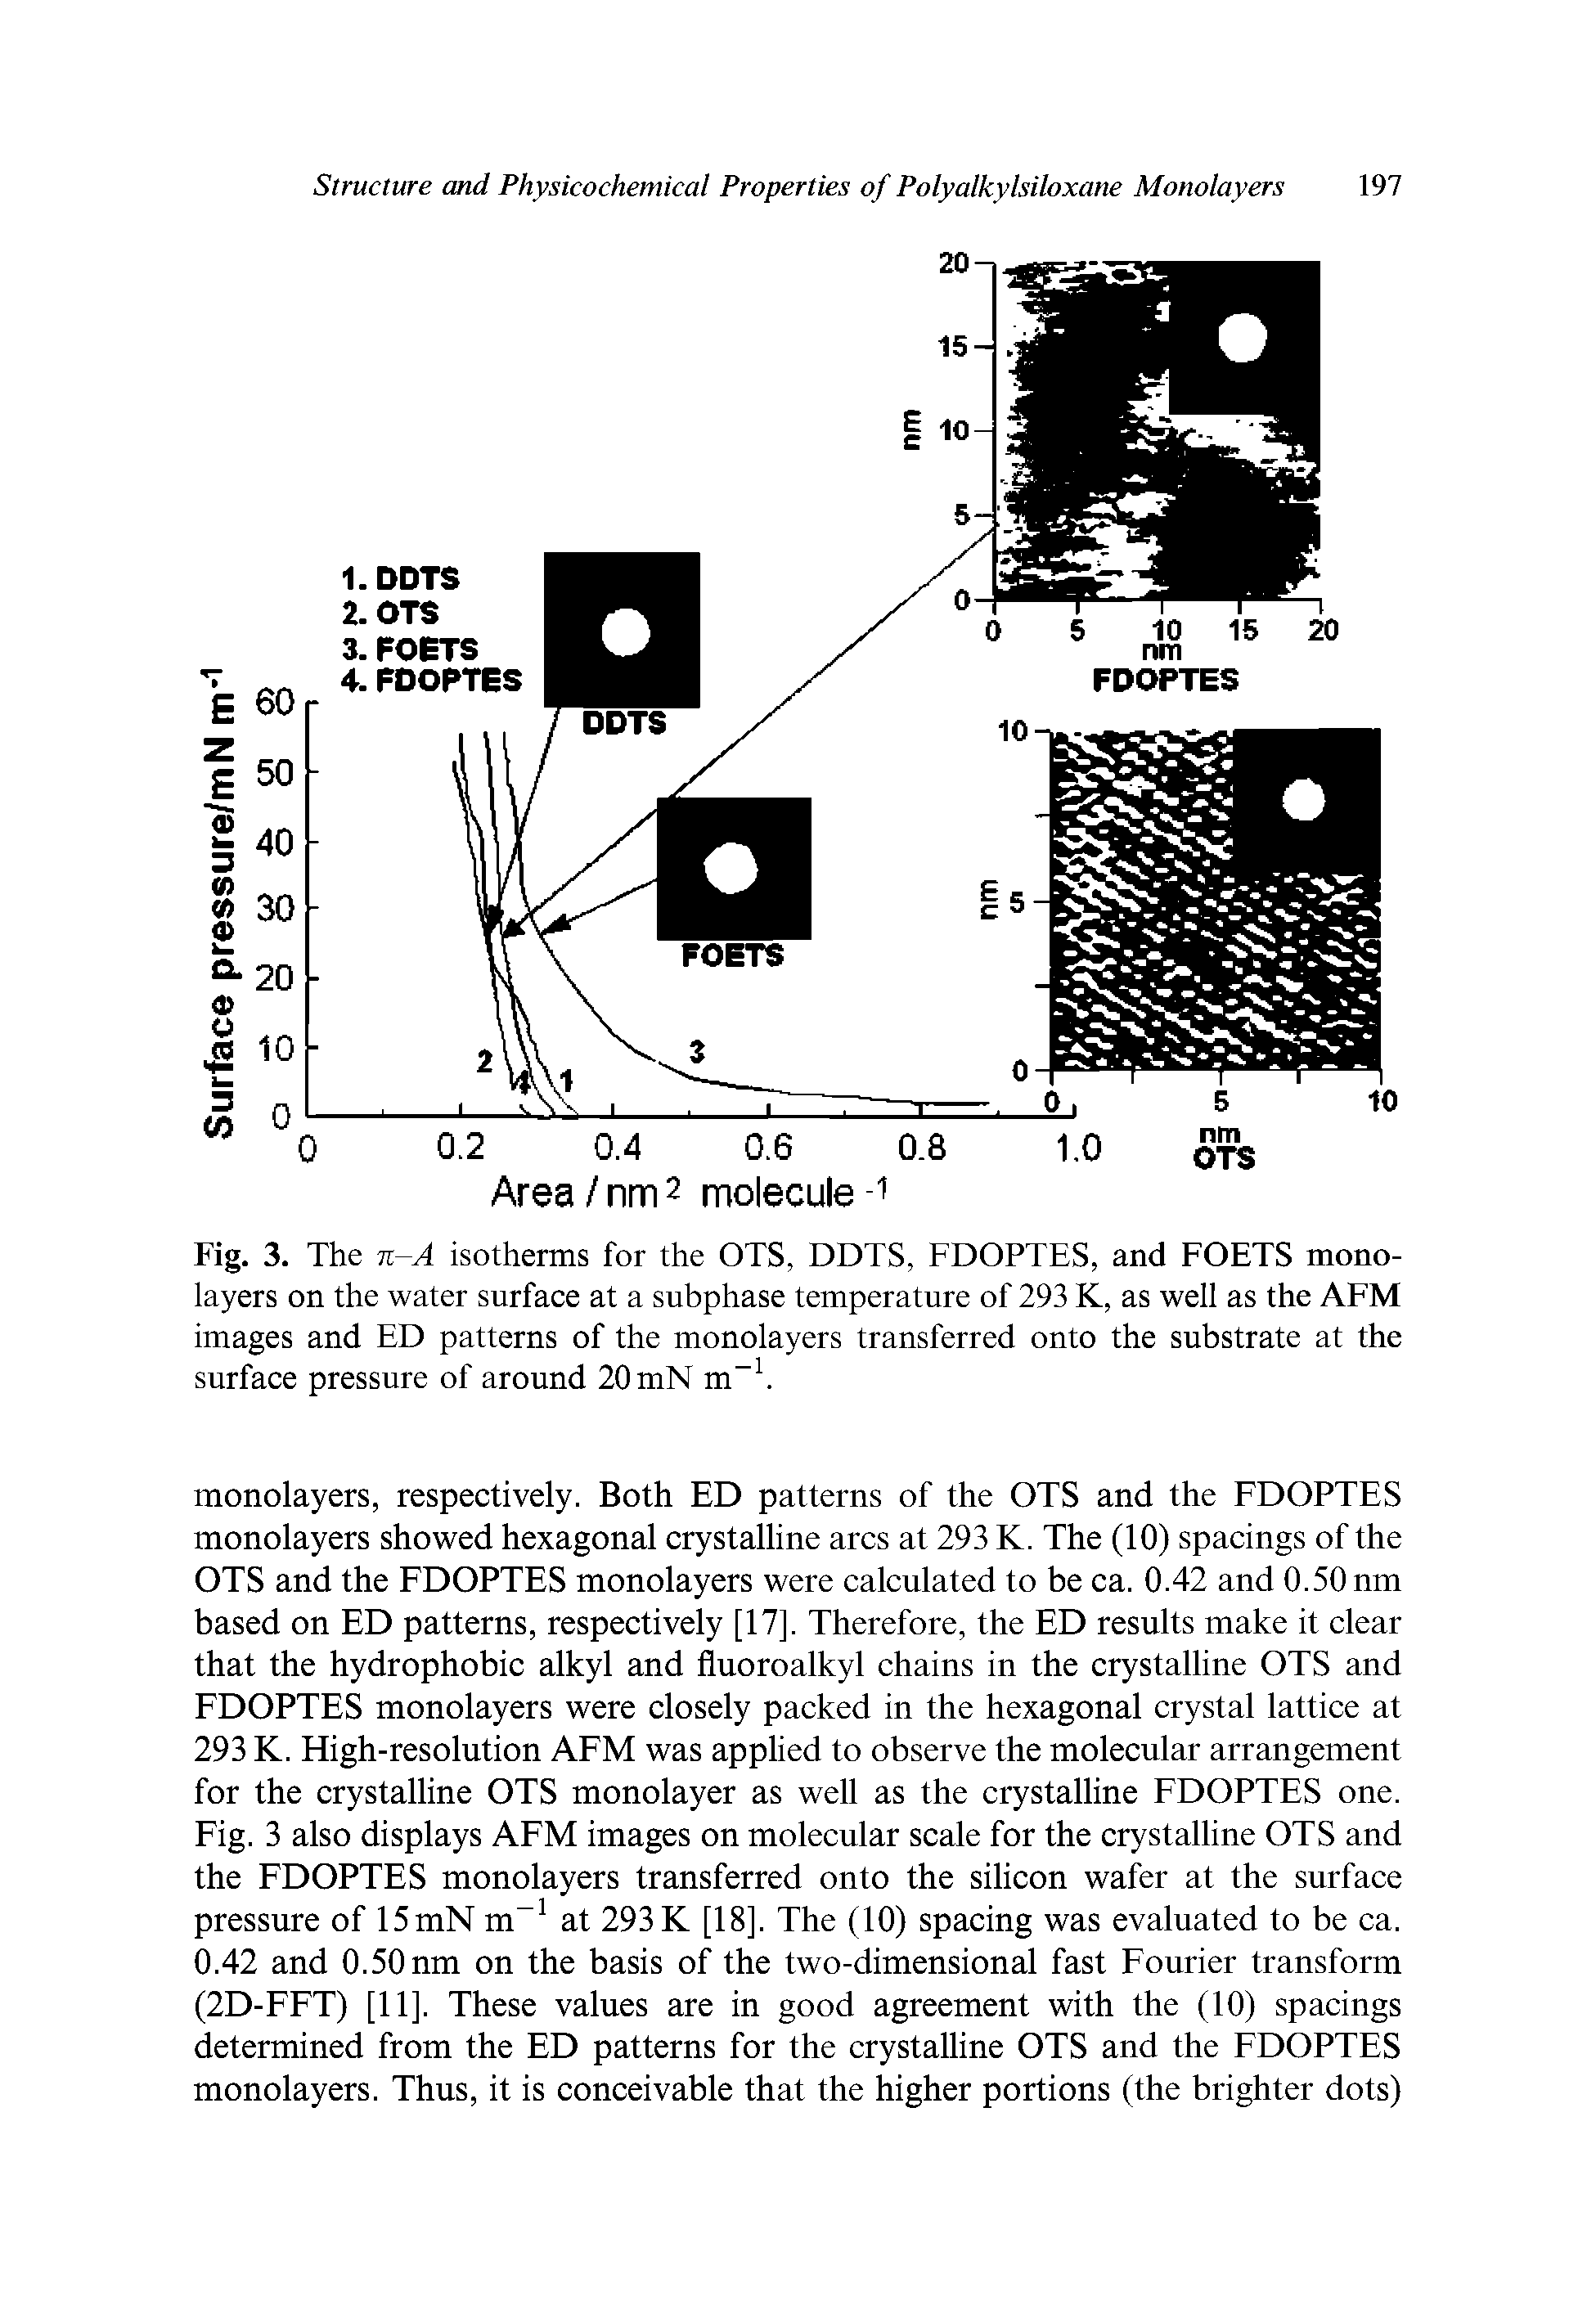 Fig. 3. The %-A isotherms for the OTS, DDTS, FDOPTES, and FOETS mono-layers on the water surface at a subphase temperature of 293 K, as well as the AFM images and ED patterns of the monolayers transferred onto the substrate at the surface pressure of around 20 mN m 1.